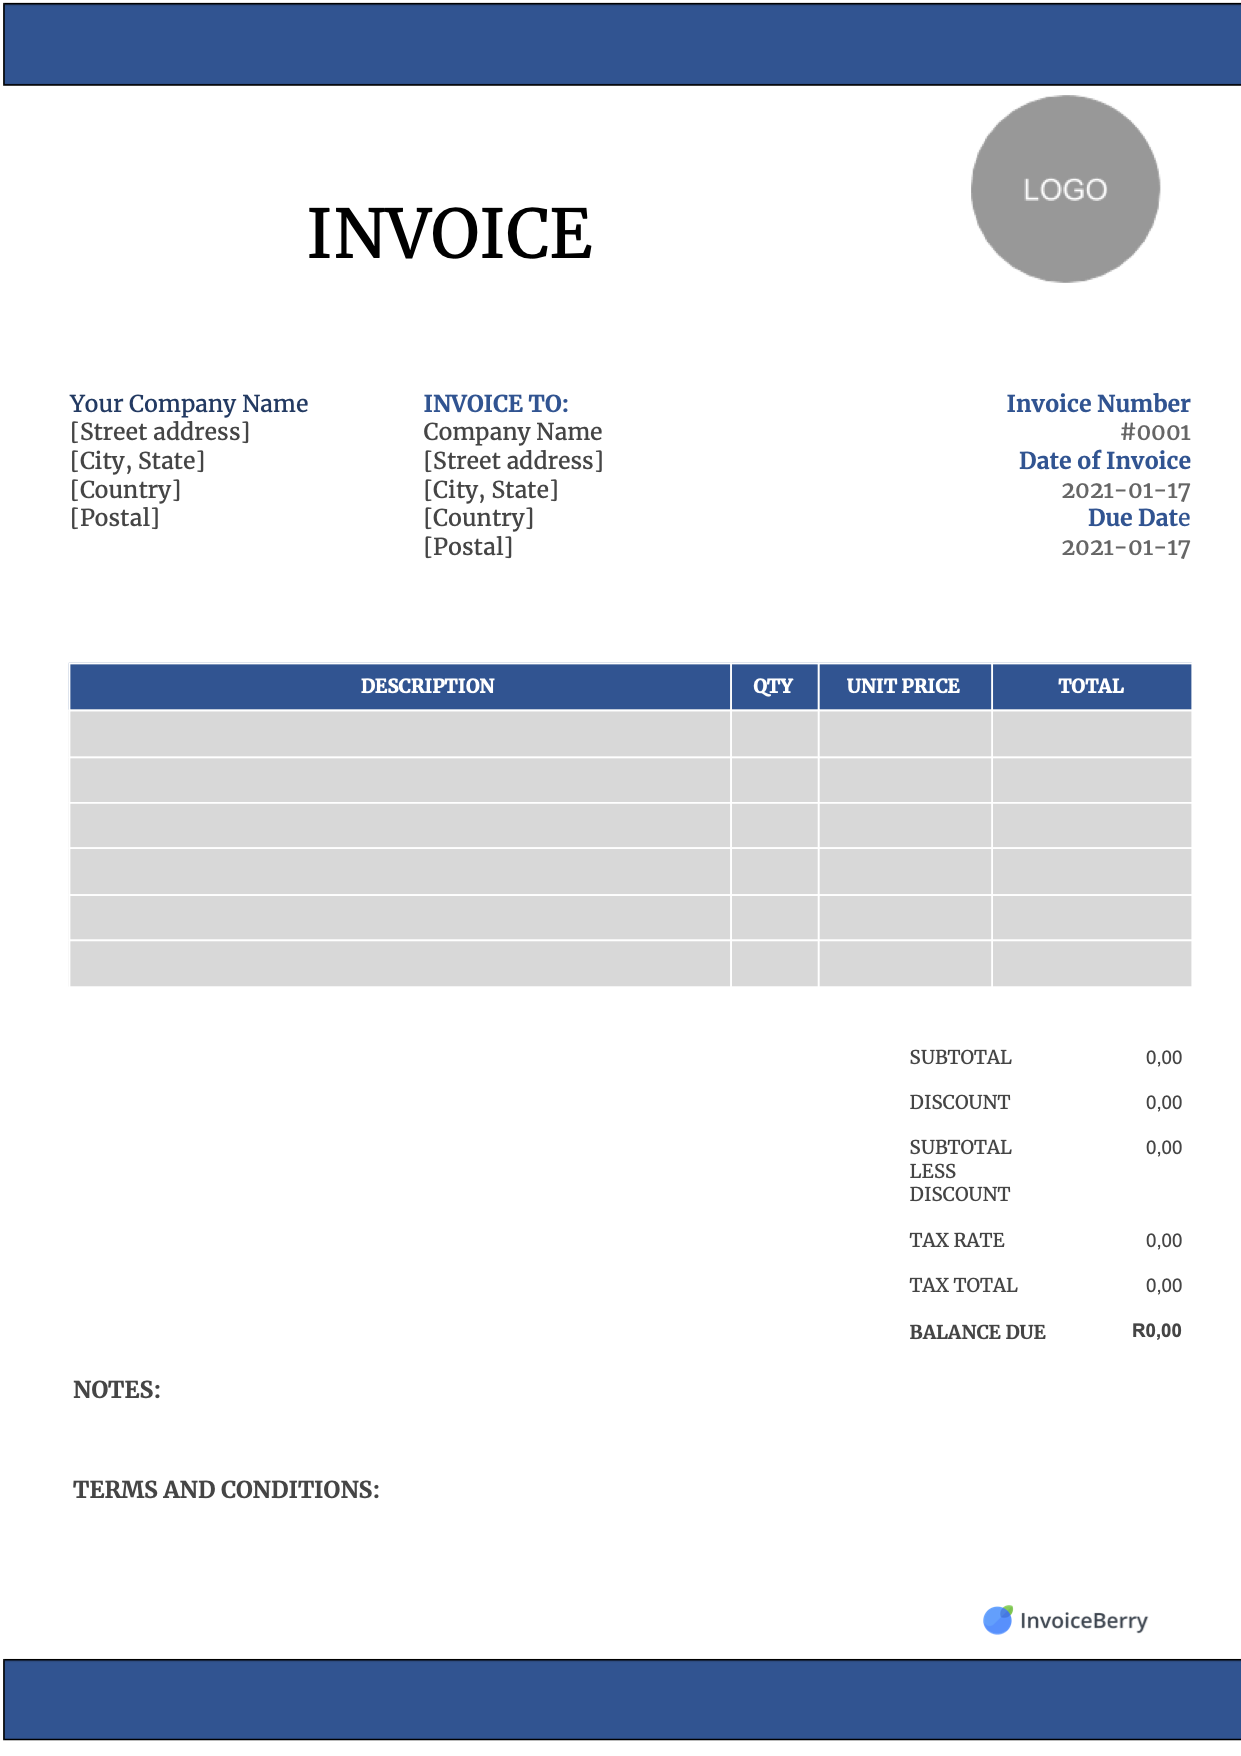 Free Invoice Templates Download - All Formats And Industries inside Free Printable Invoices